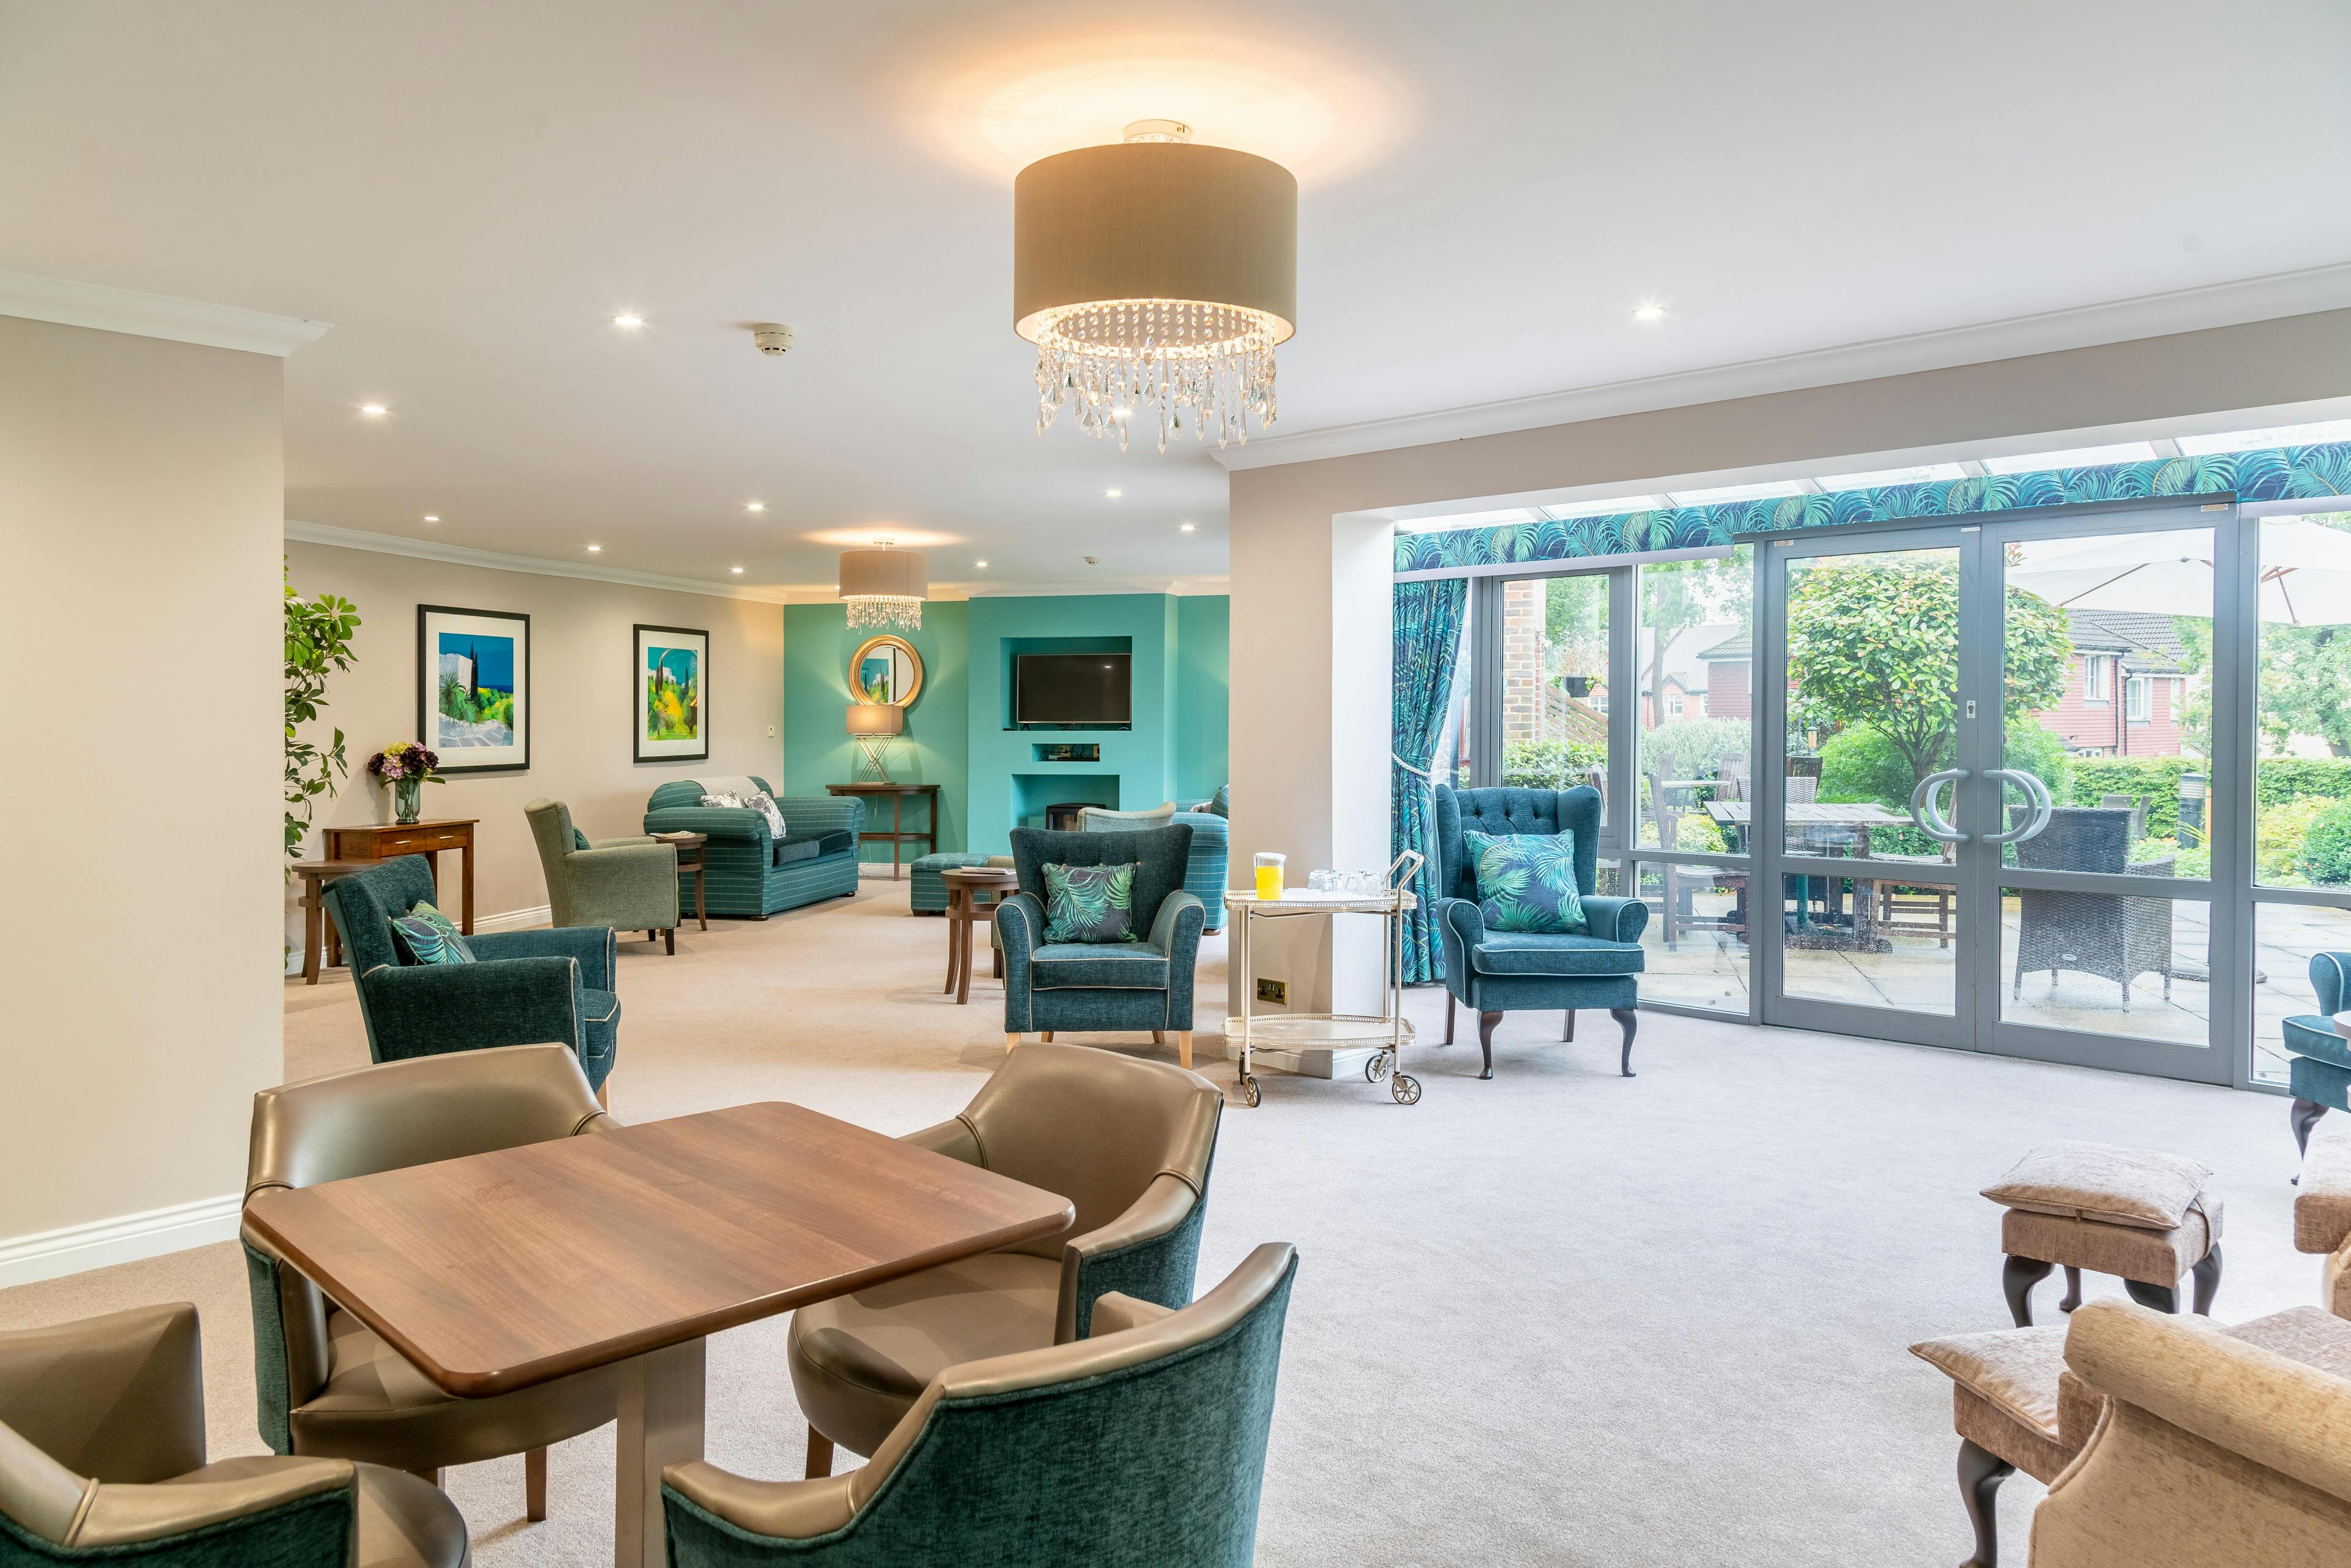 Lounge Area at Tandridge Heights Care Home in Oxted, Surrey